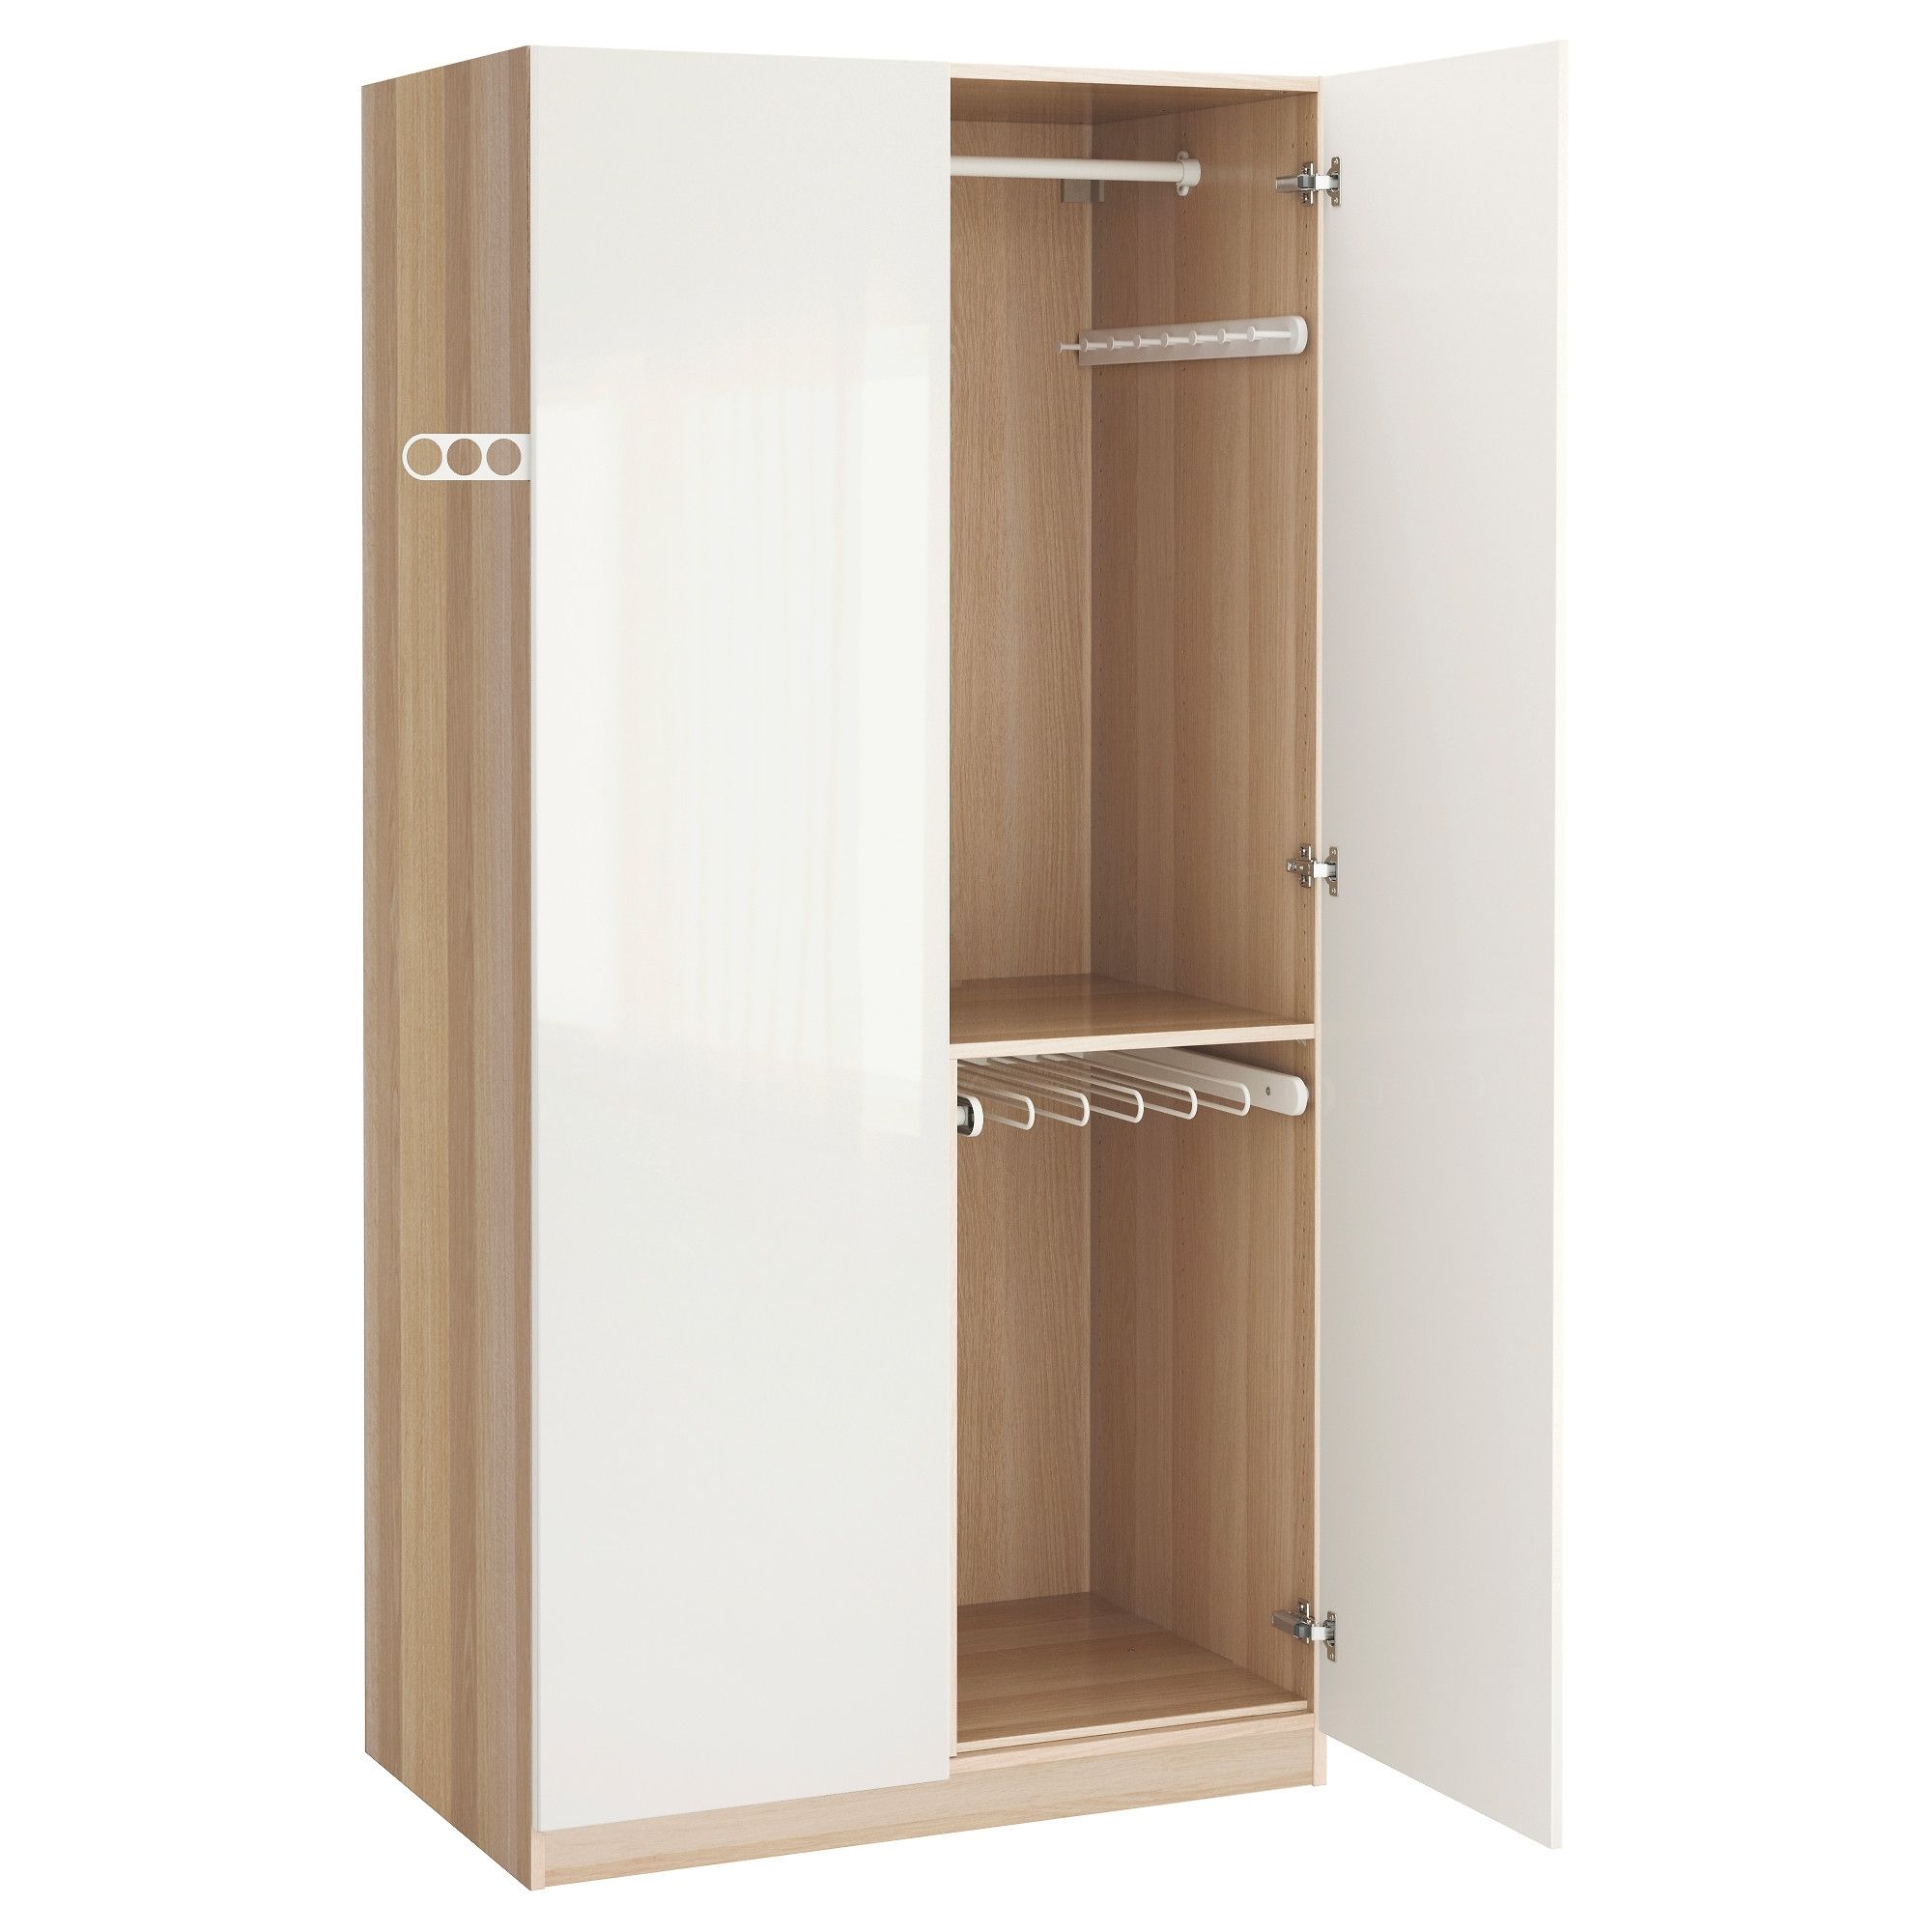 Widely Used High Gloss White Wardrobe Toronto Wardrobes 2017 That Can Make Regarding Oak And White Wardrobes (View 9 of 15)